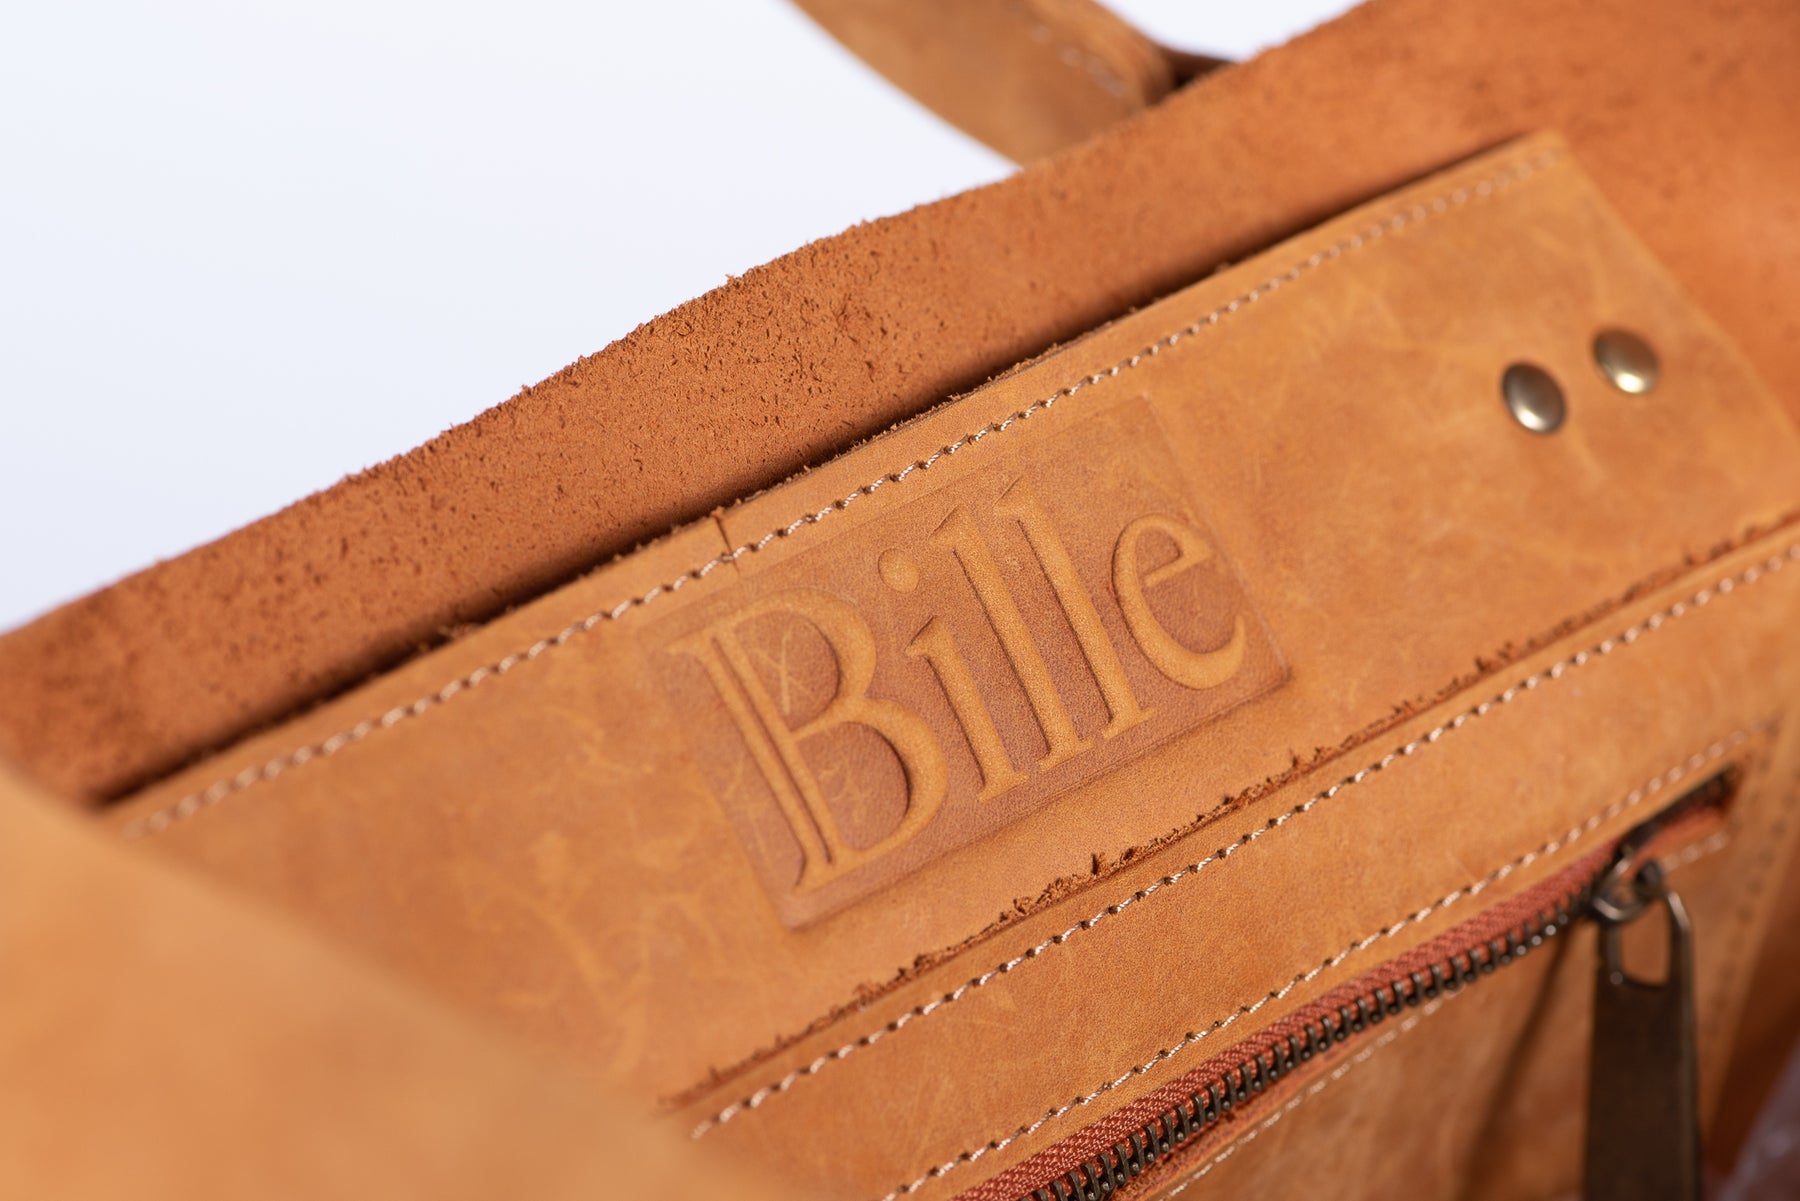 Beautiful leather with Bille logo